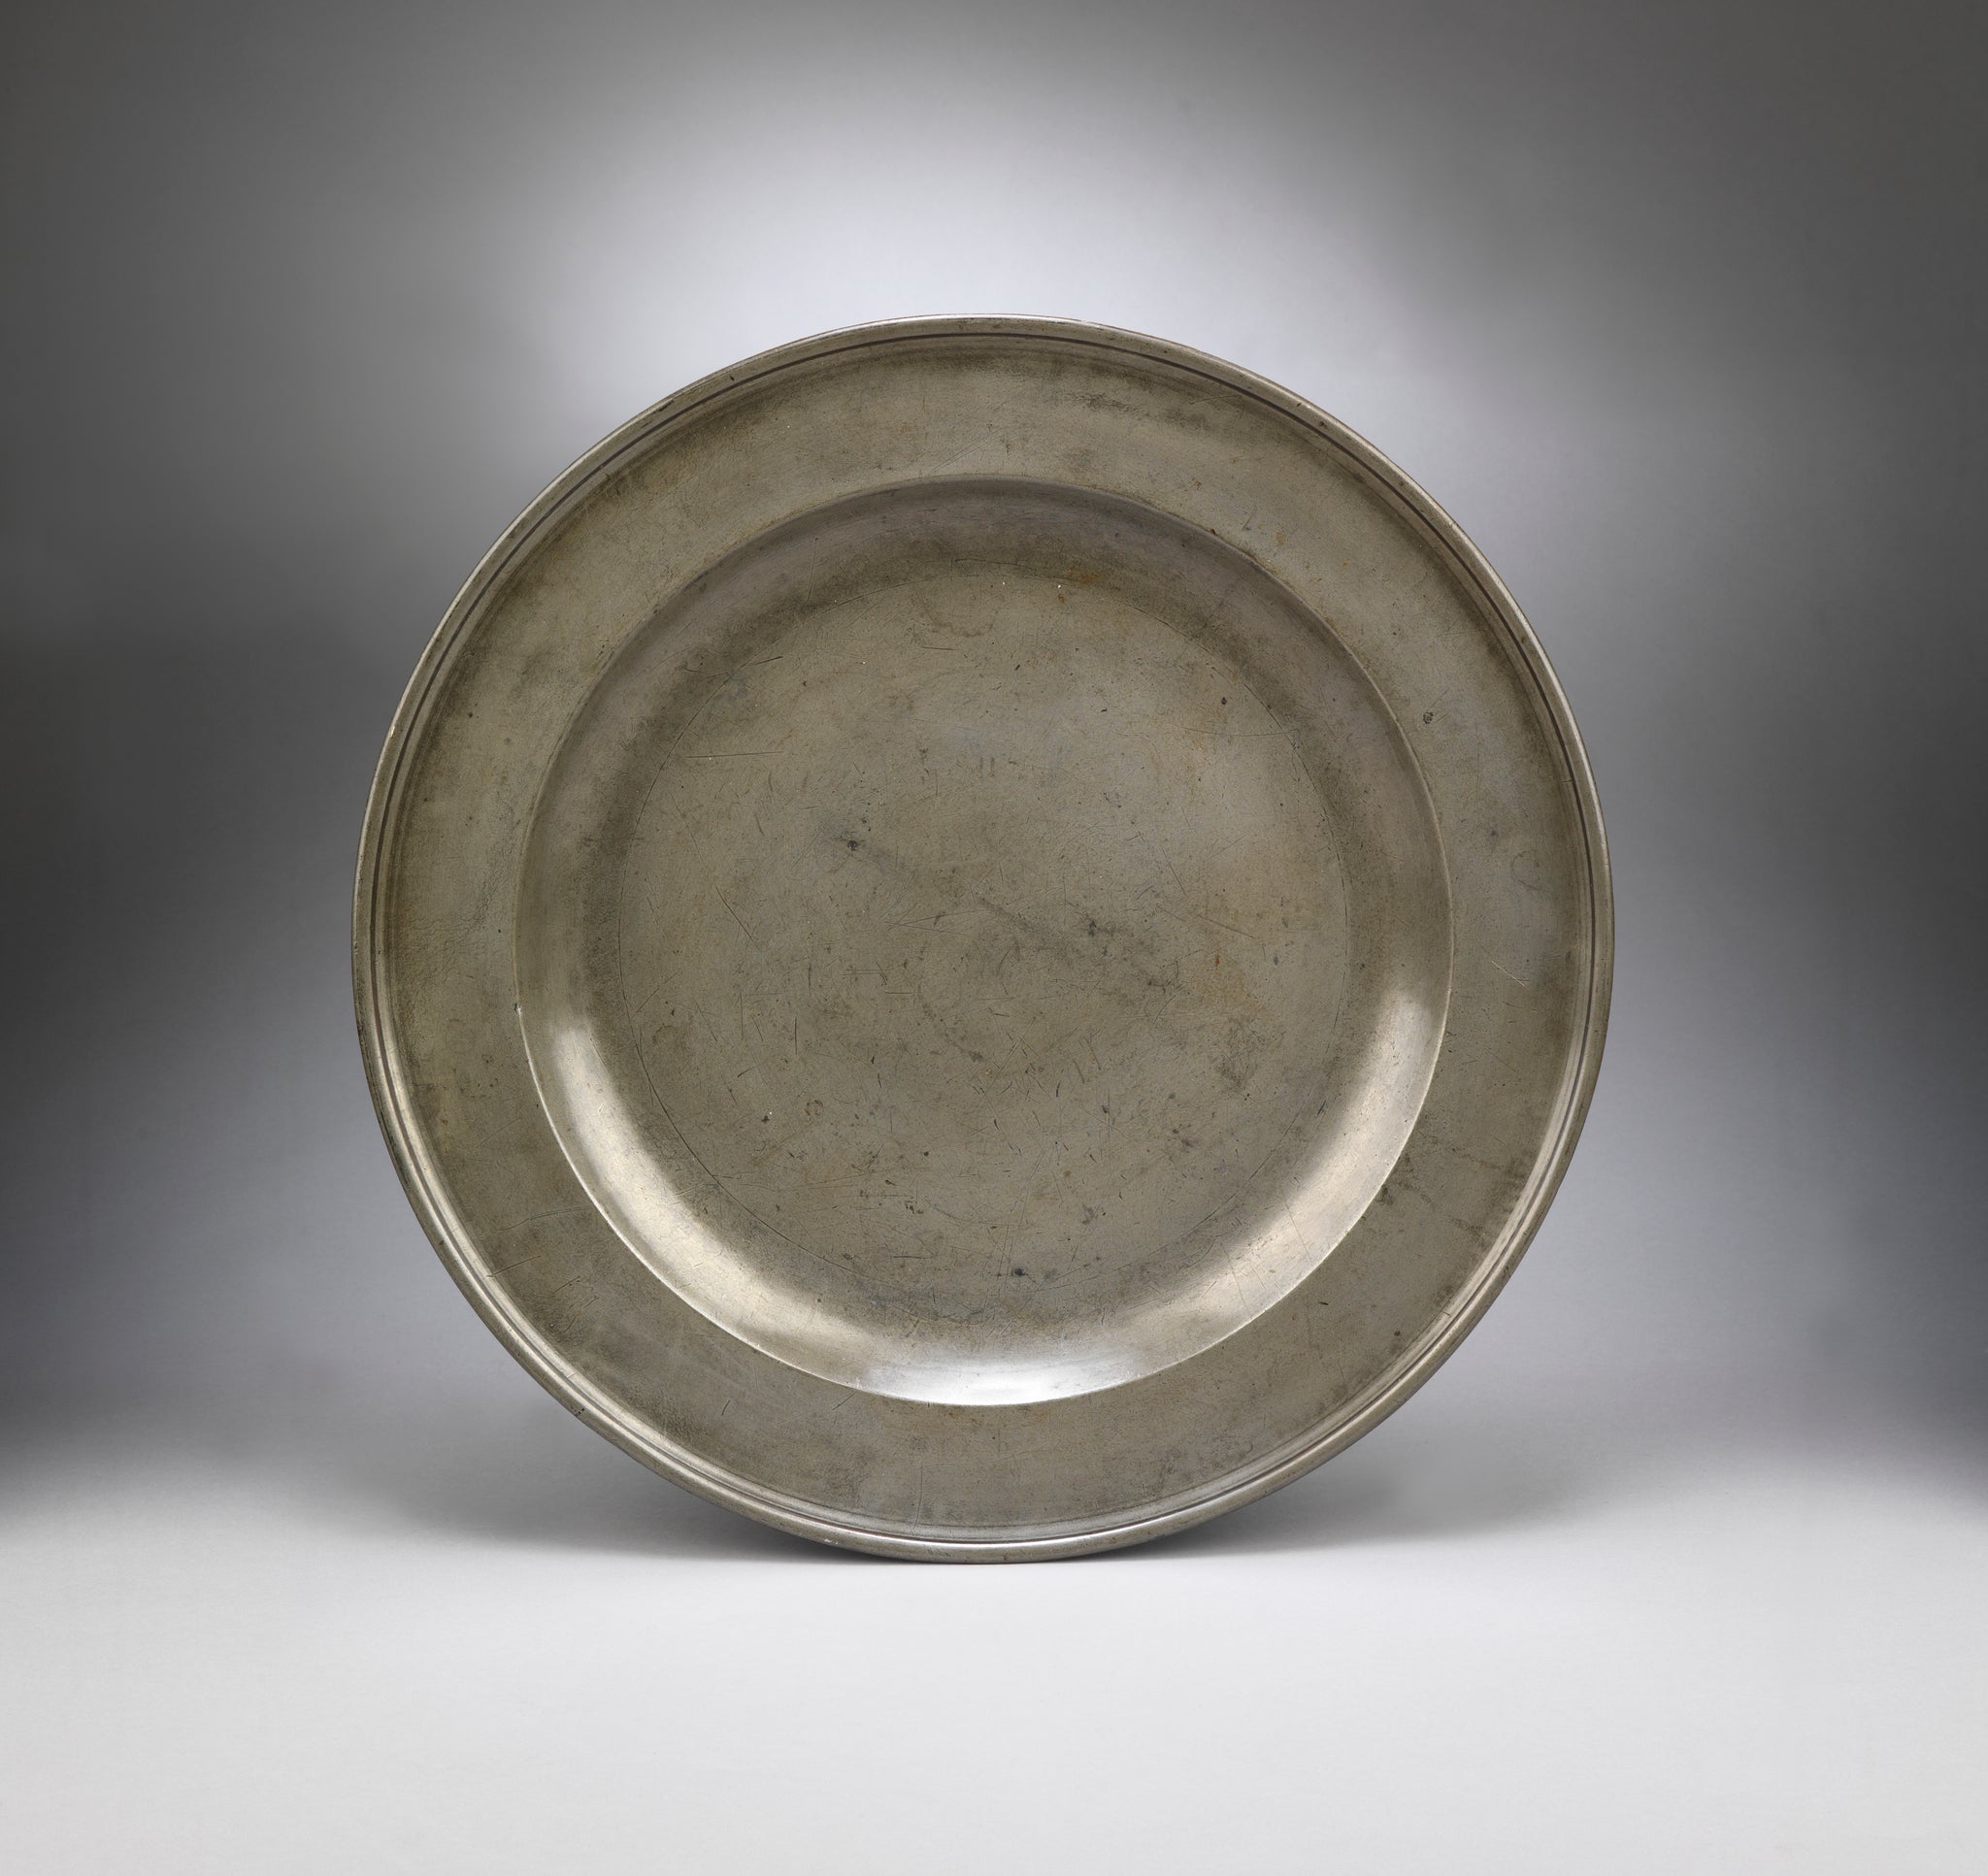 Delightful Queen Anne Pewter Serving Charger